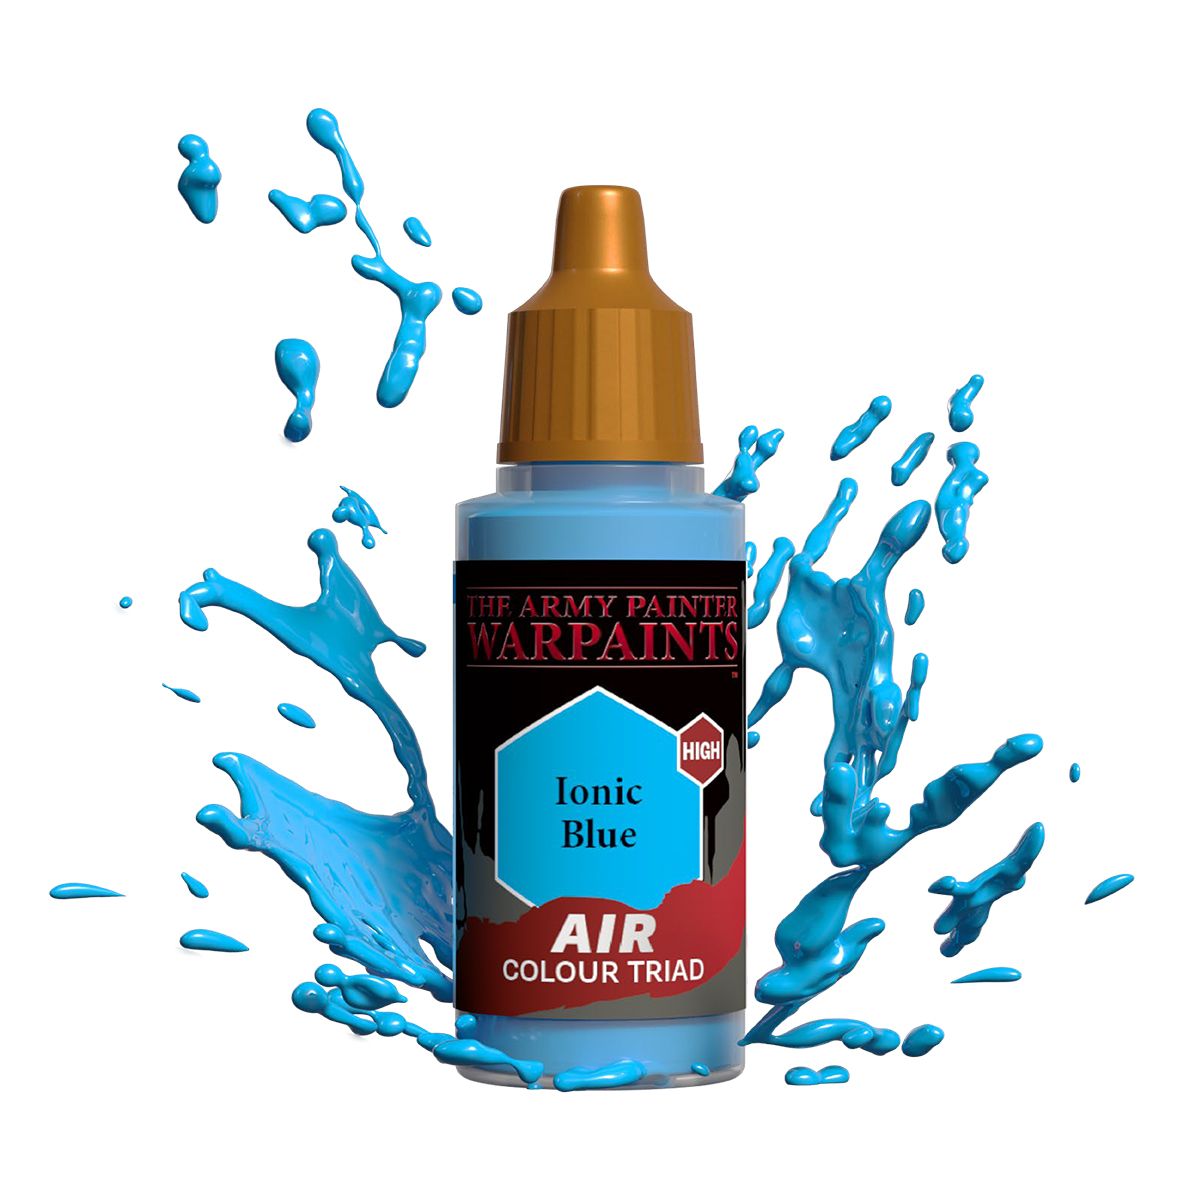 Army Painter Warpaint Air -  Ionic Blue (18ml) - Loaded Dice